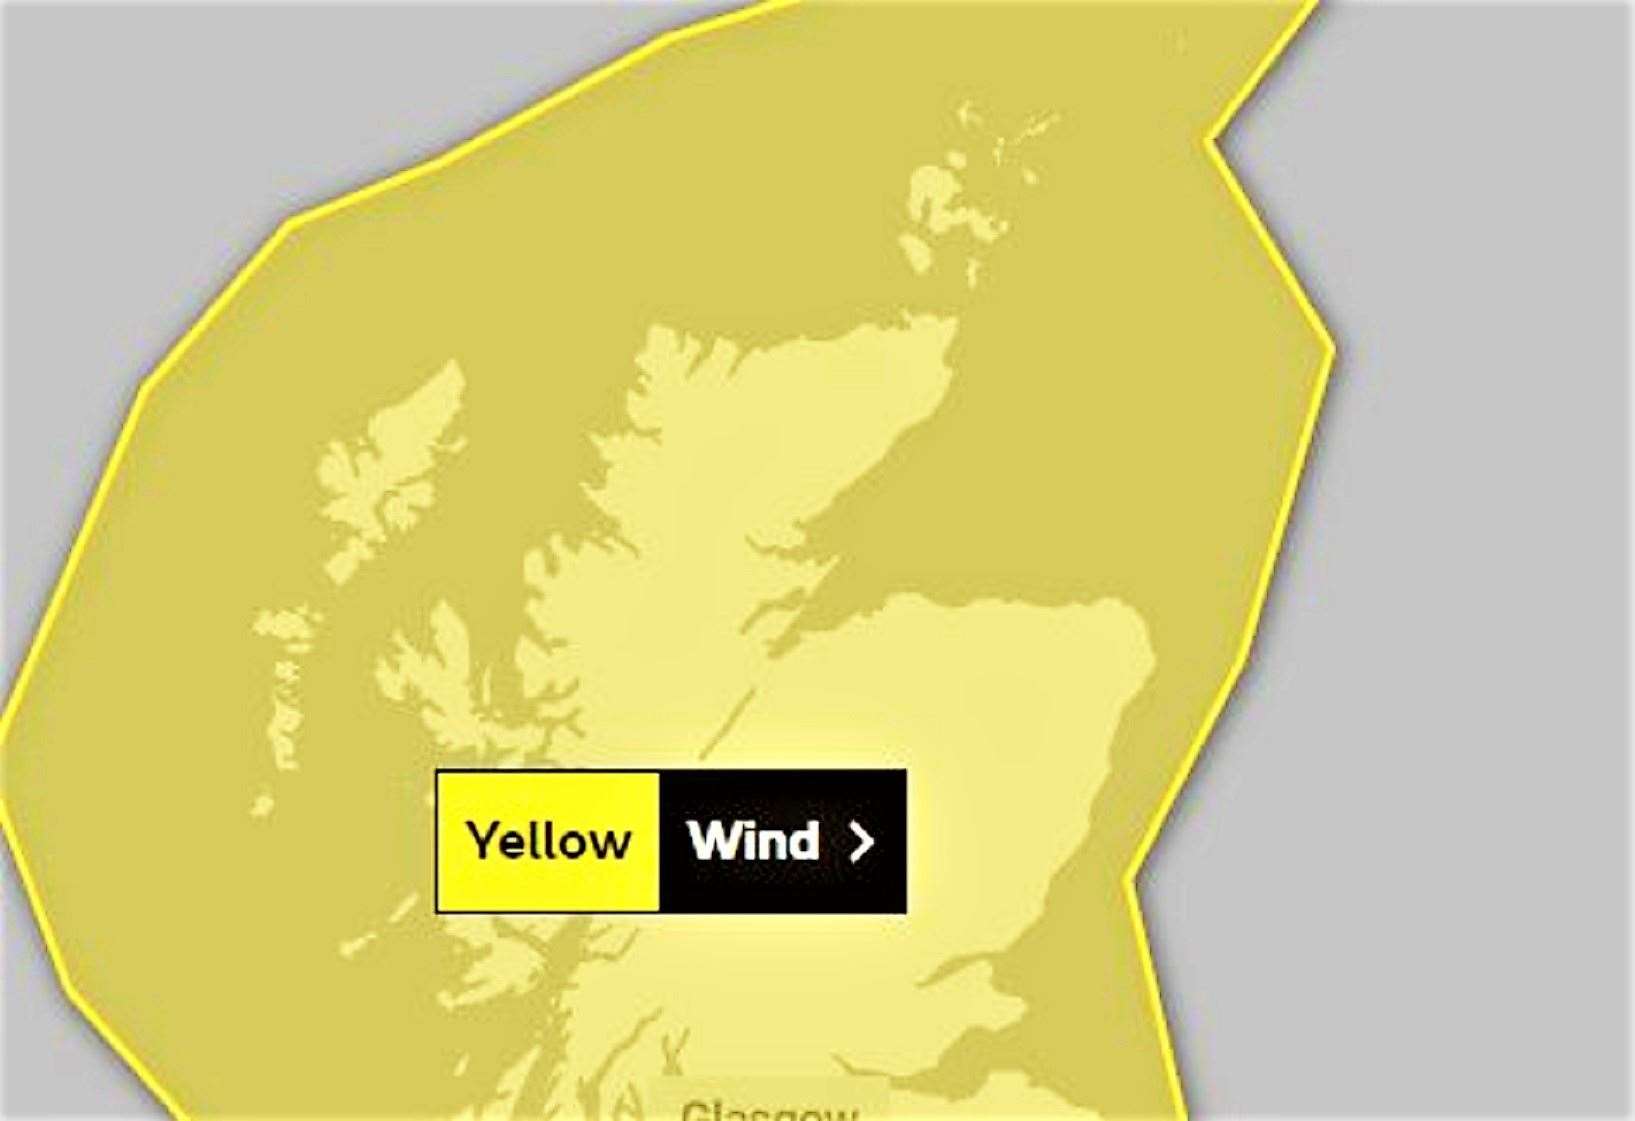 Met Office weather warning is in place for Friday and Saturday.